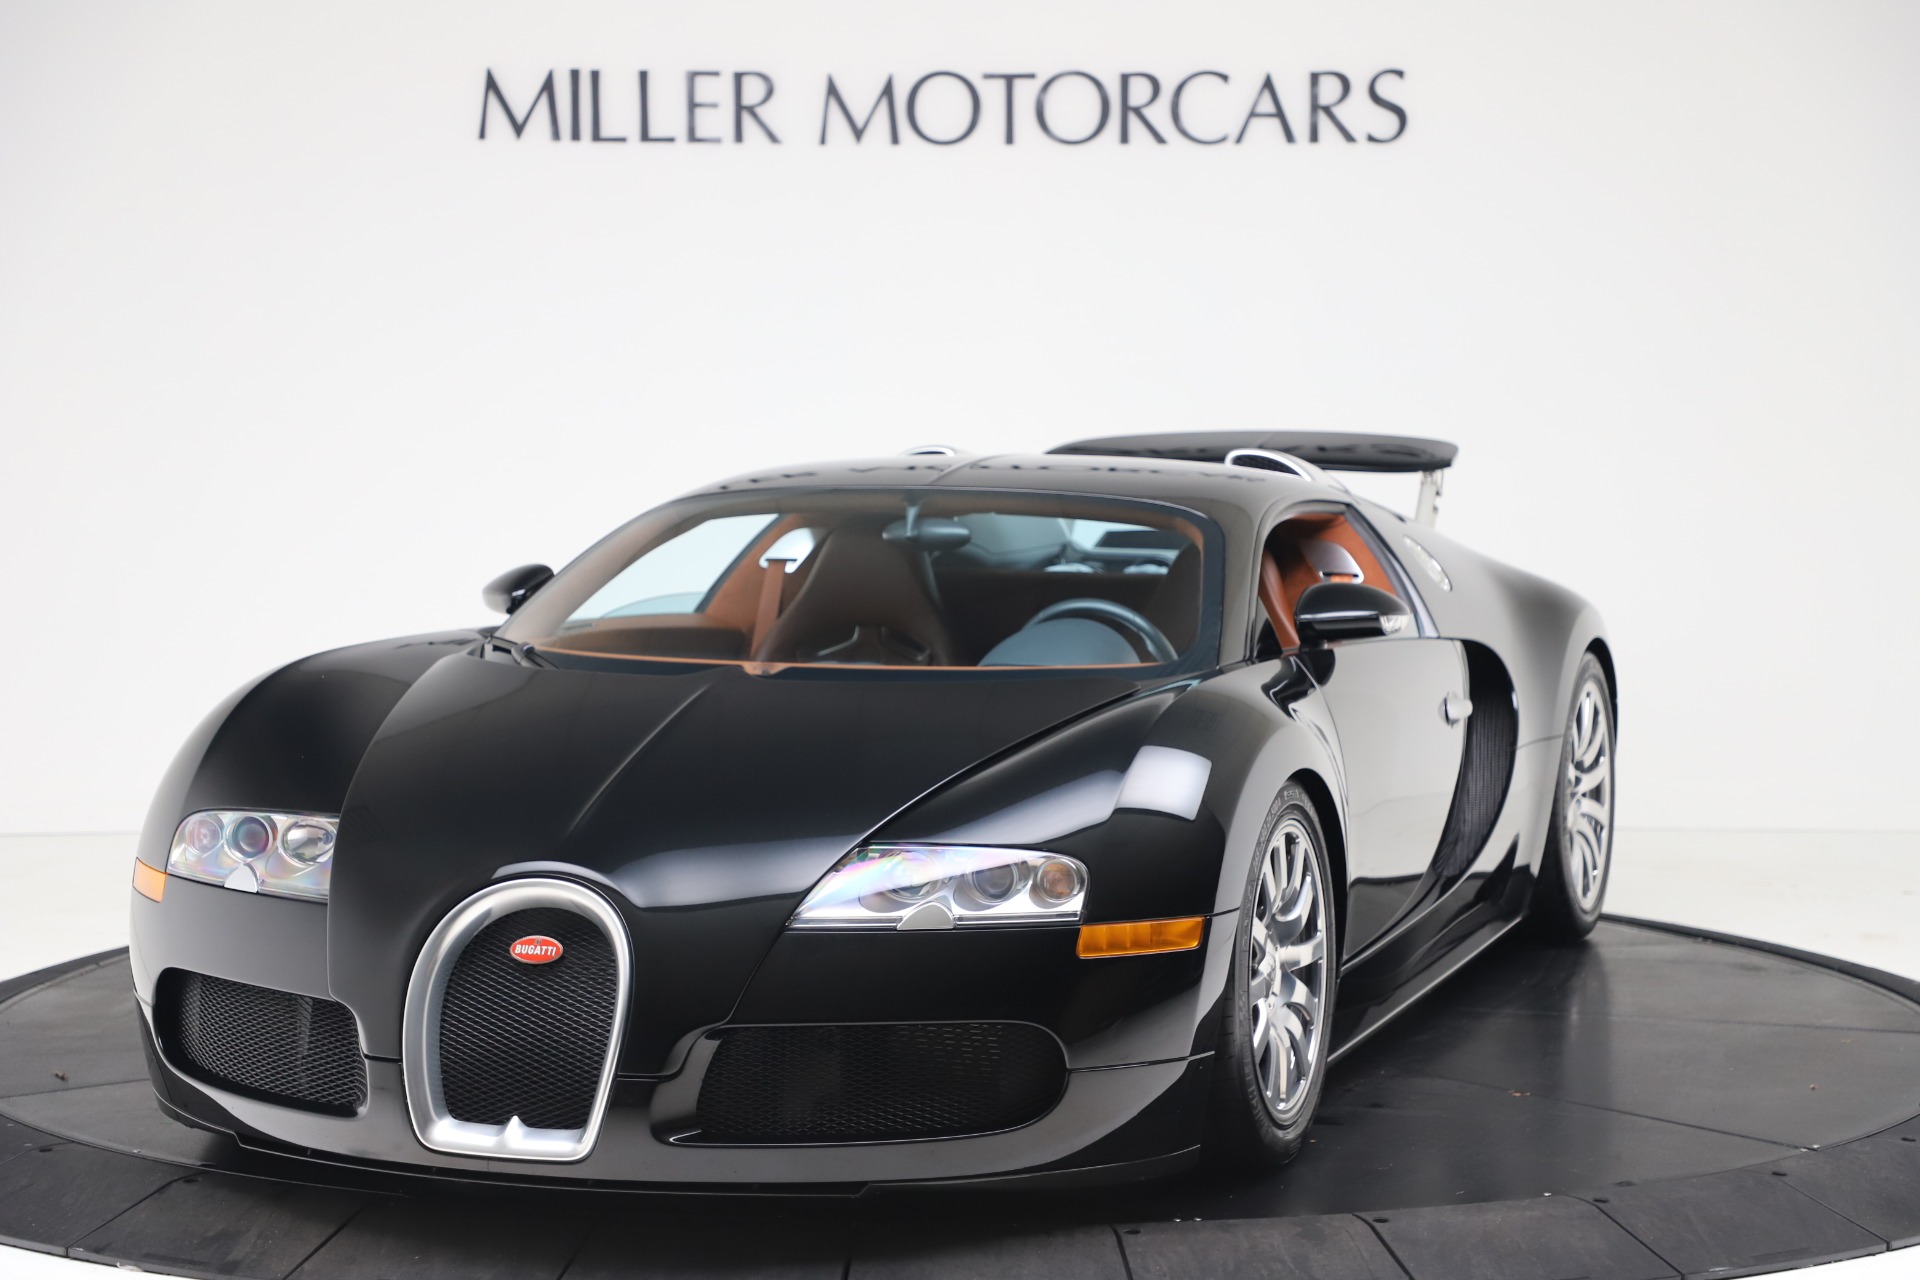 Used 2008 Bugatti Veyron 16.4 for sale Sold at Alfa Romeo of Westport in Westport CT 06880 1